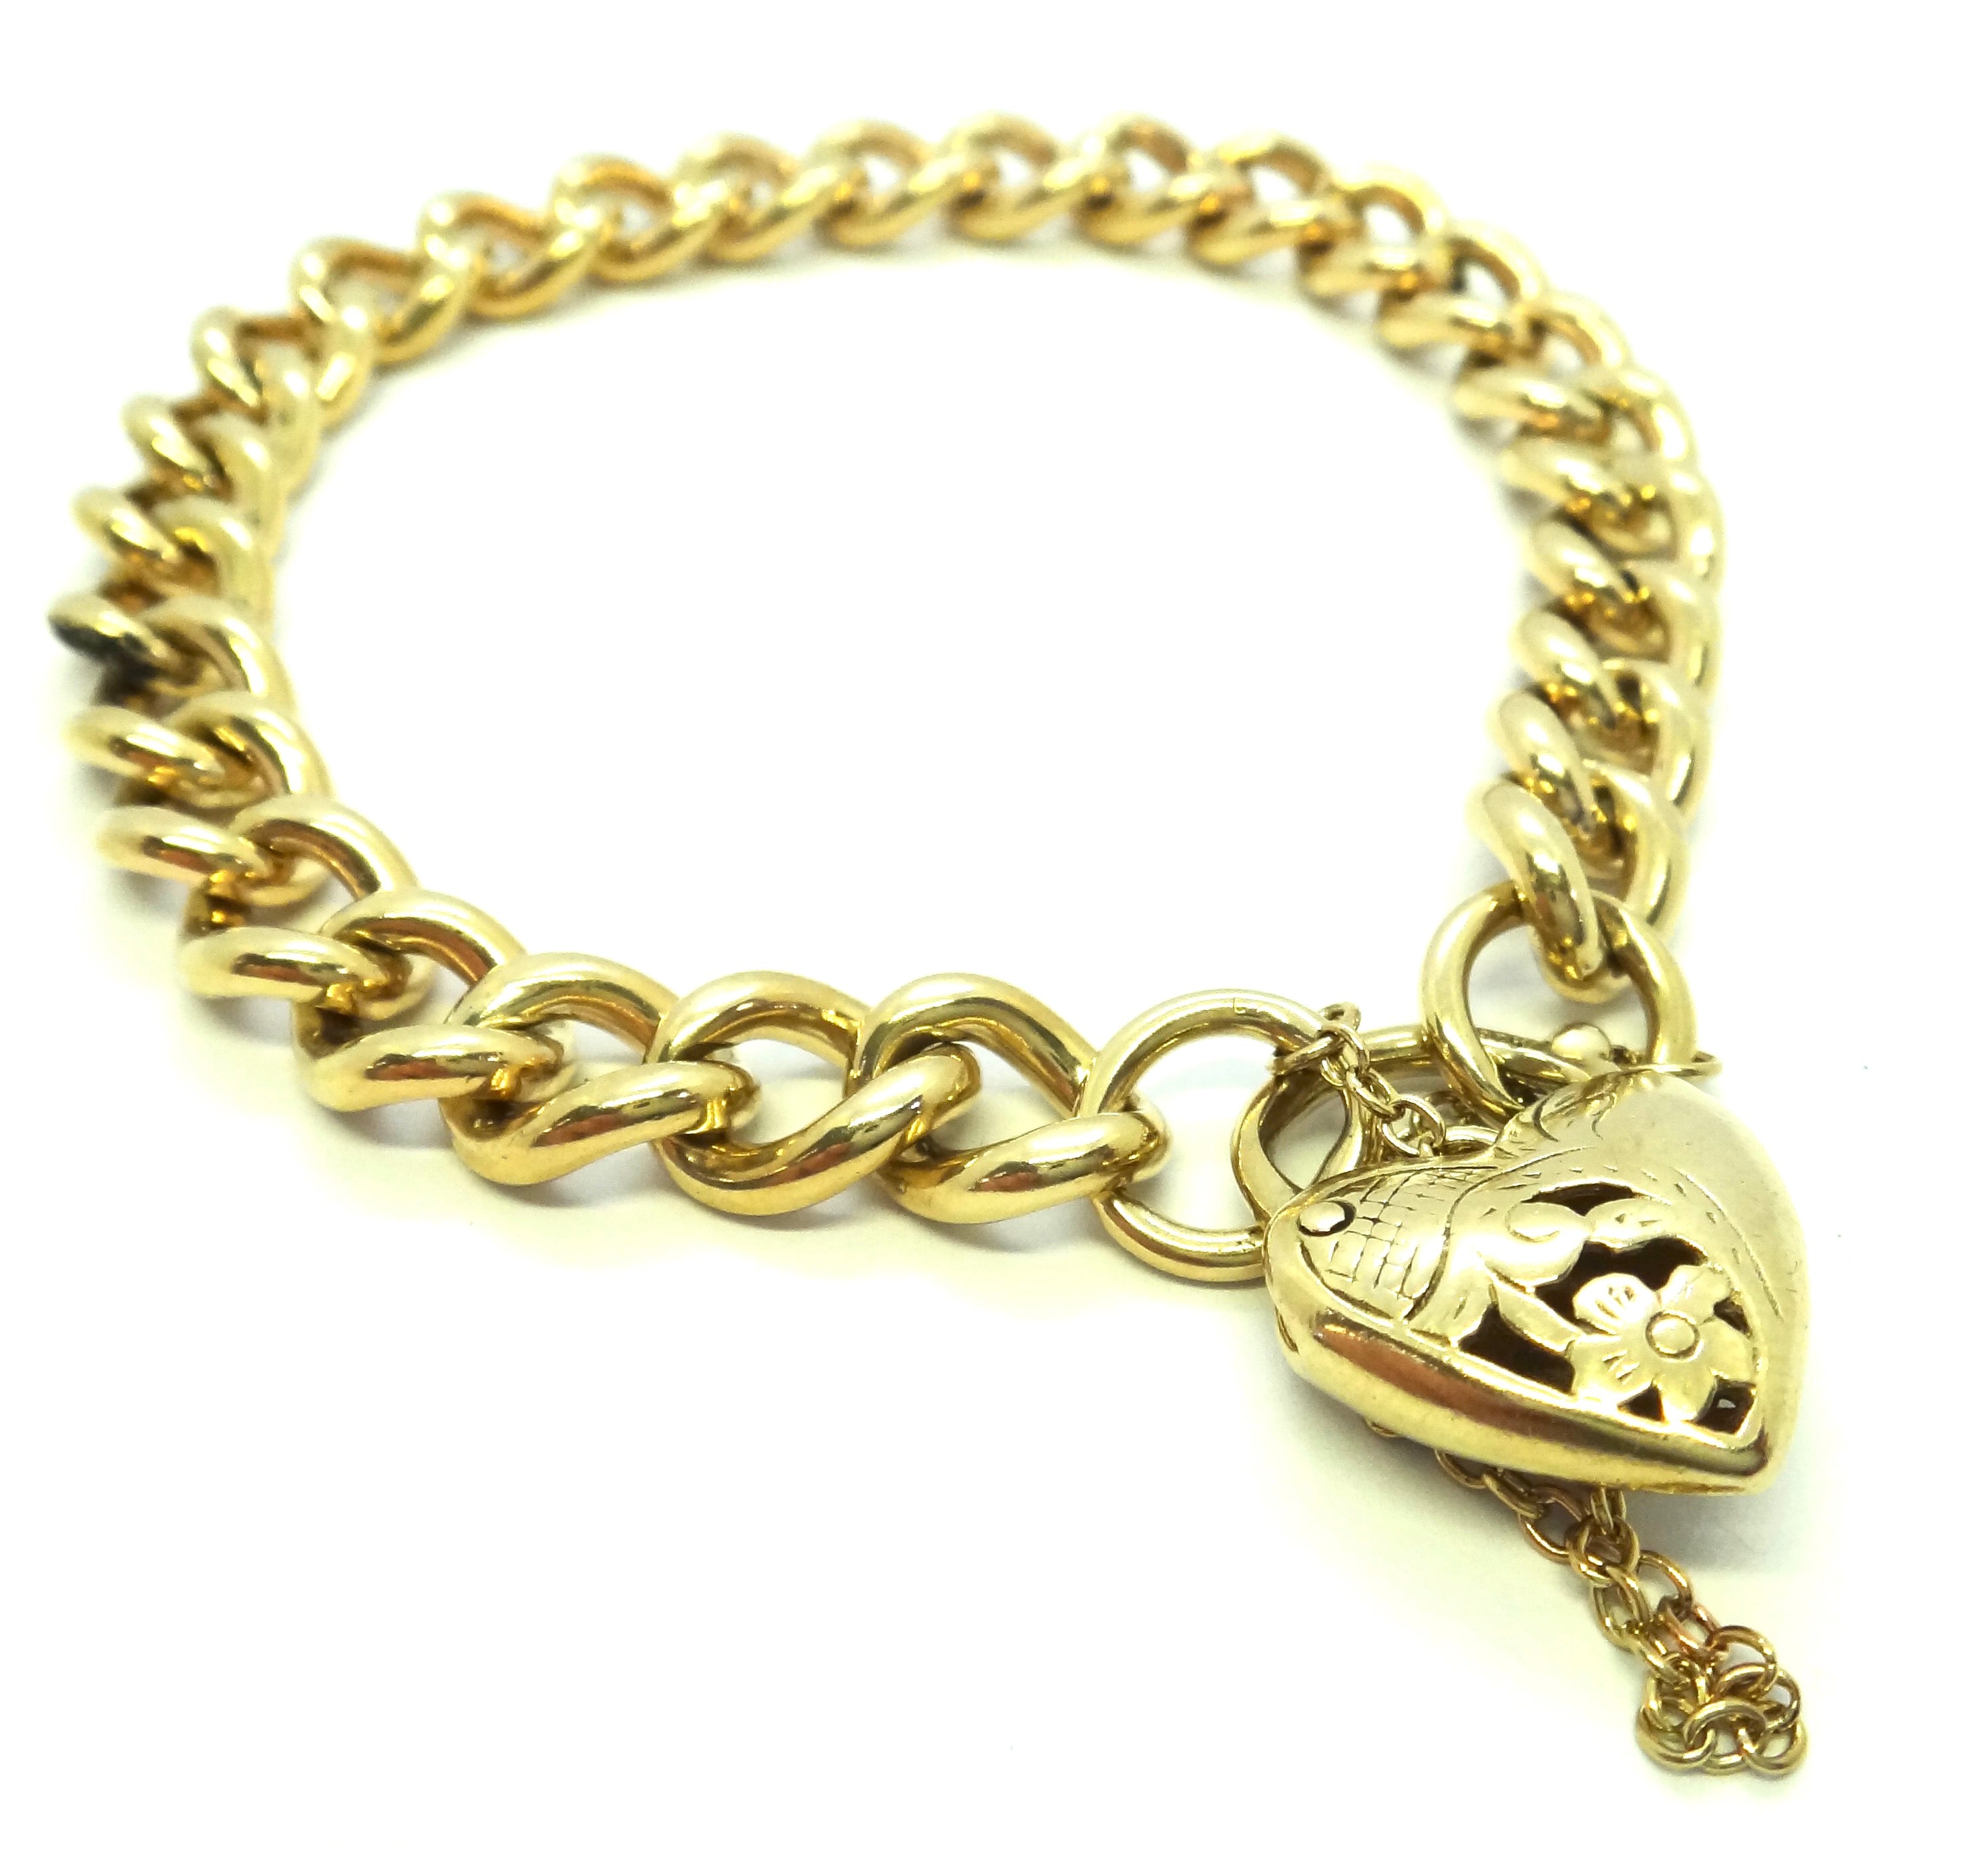 9ct Yellow Gold Heavy and Solid Curb Link Charm Bracelet with